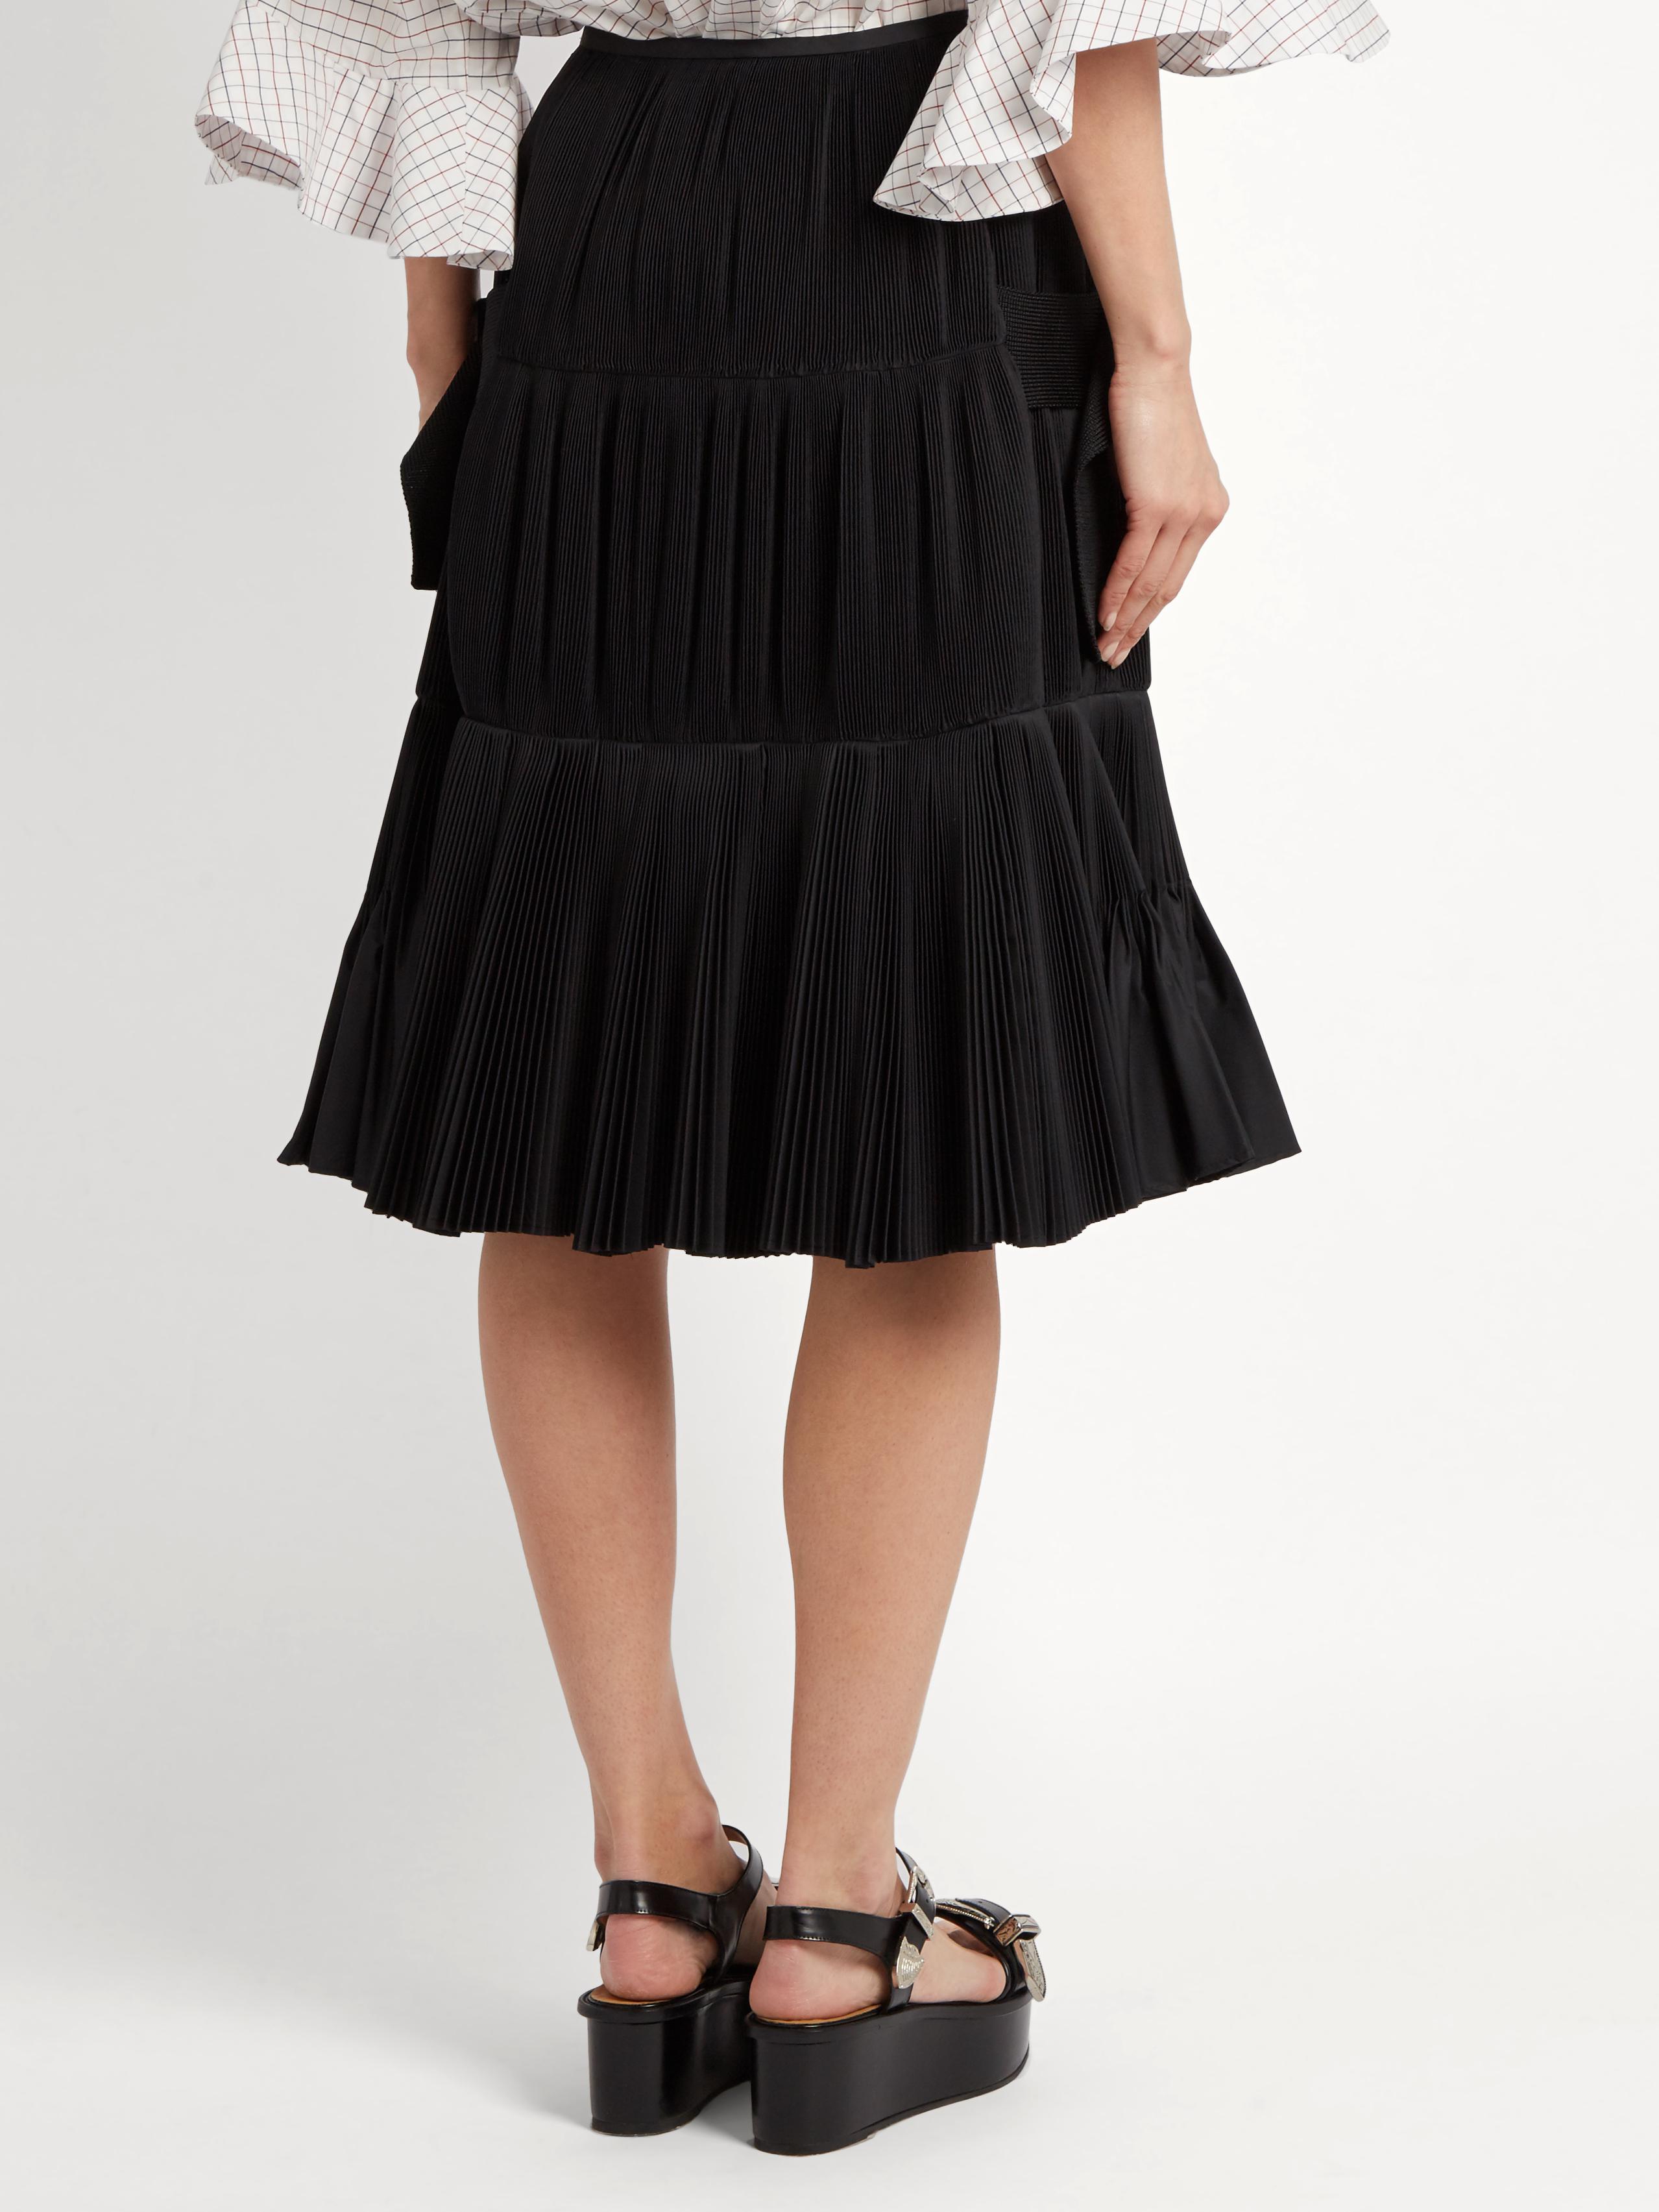 Toga Synthetic Accordion-pleated Taffeta Skirt in Black - Lyst